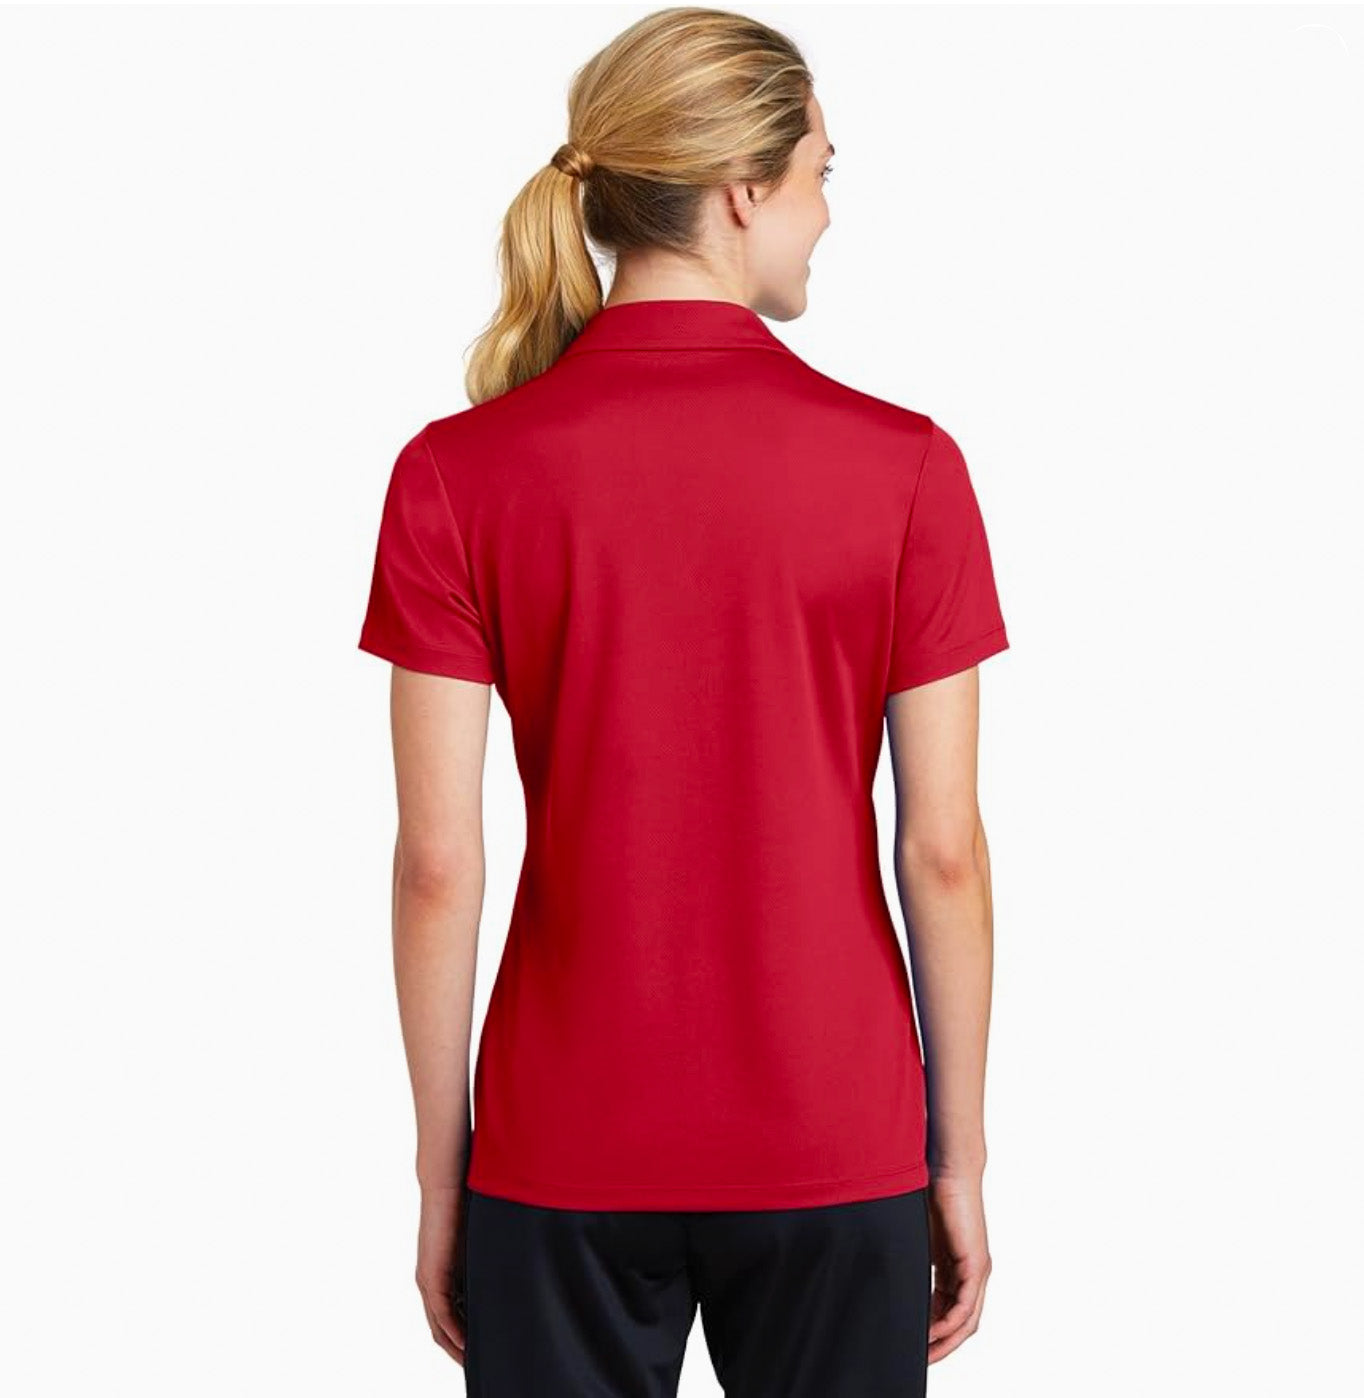 STIRRI Brand Cool Women's Red Embroidered Polo